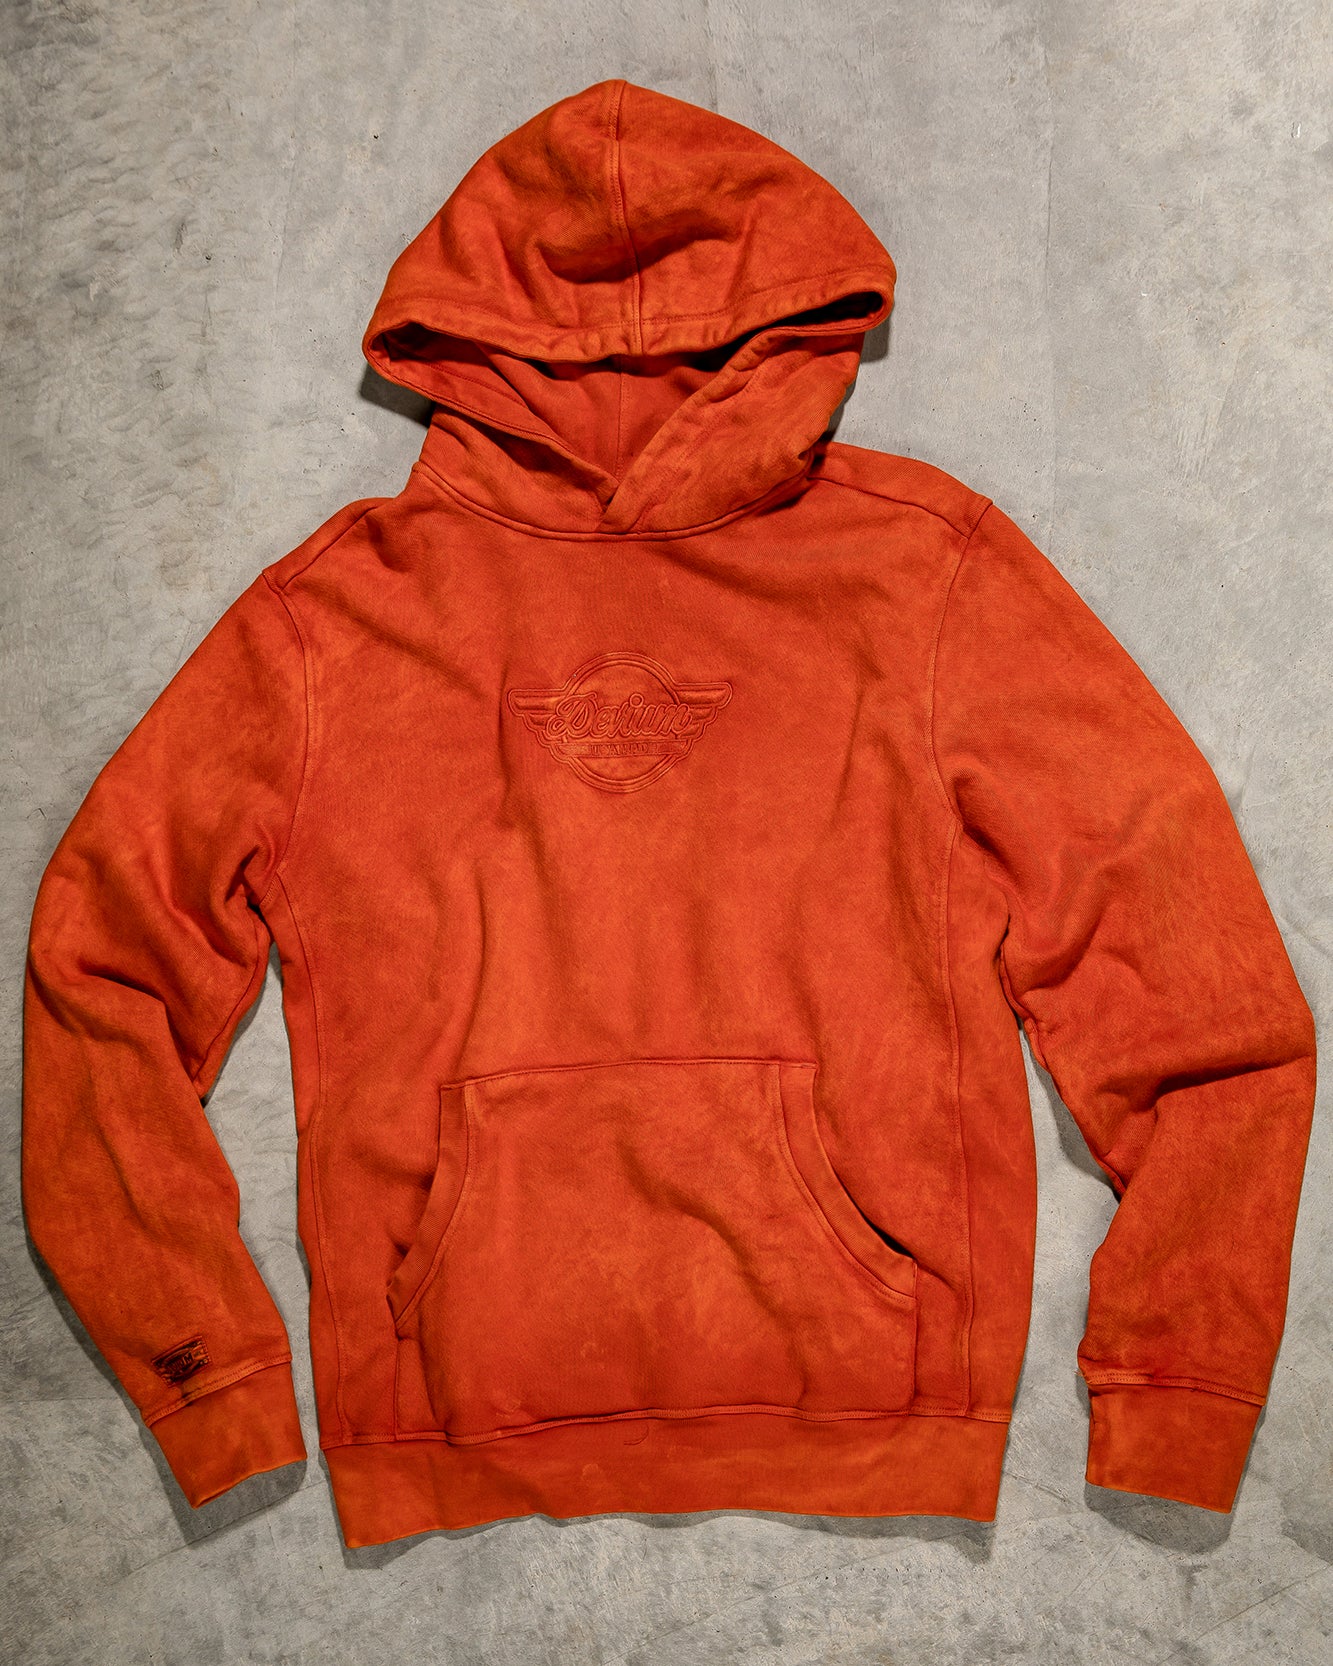 Devium USA Fleetwood French Terry Pullover Hoodie posted by ProdOrigin USA in Men's Apparel